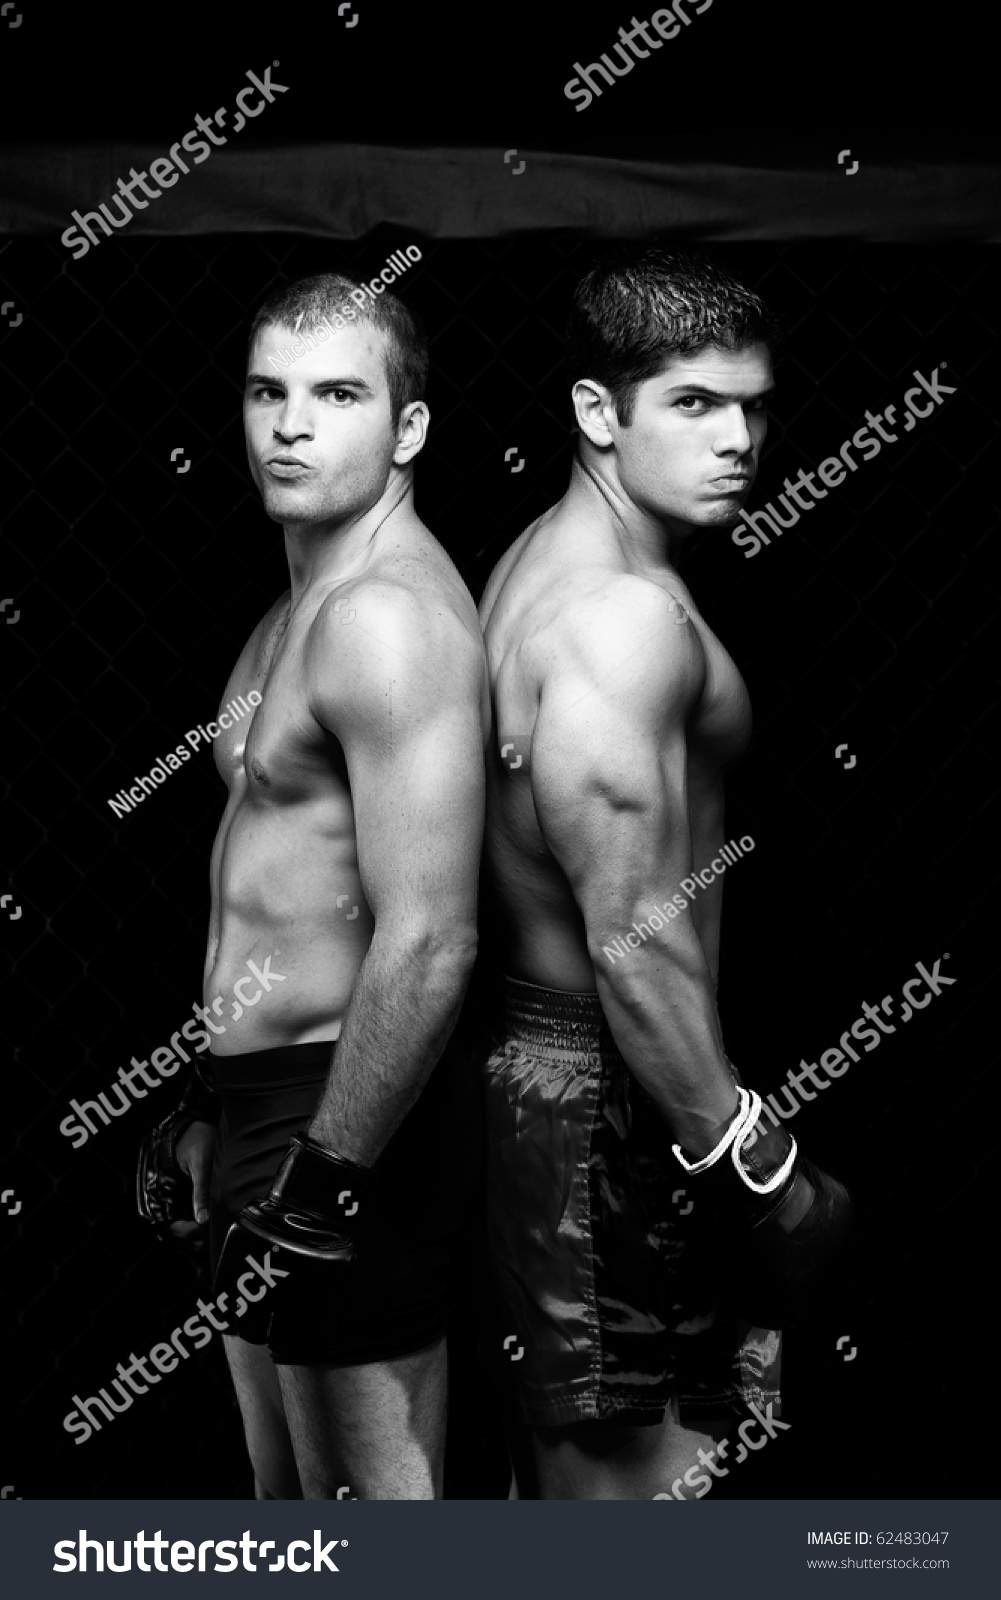 MMA - Mixed martial artists before a fight #62483047